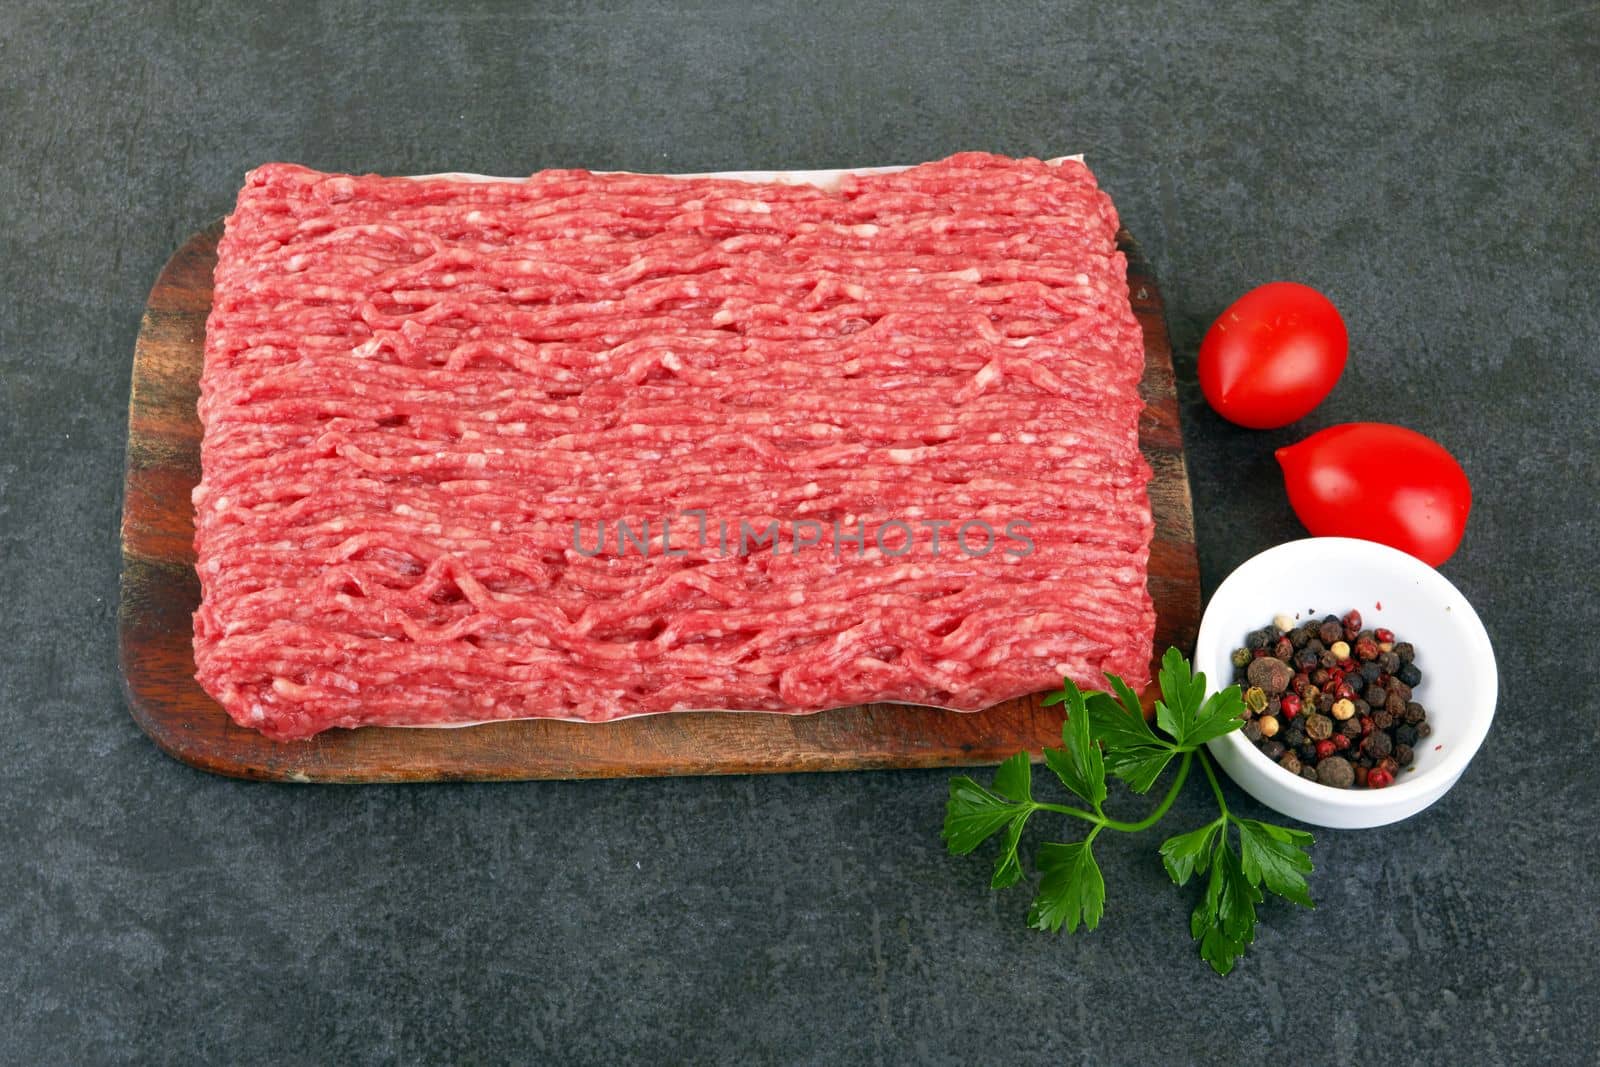 Pork and beef minced meat by pioneer111